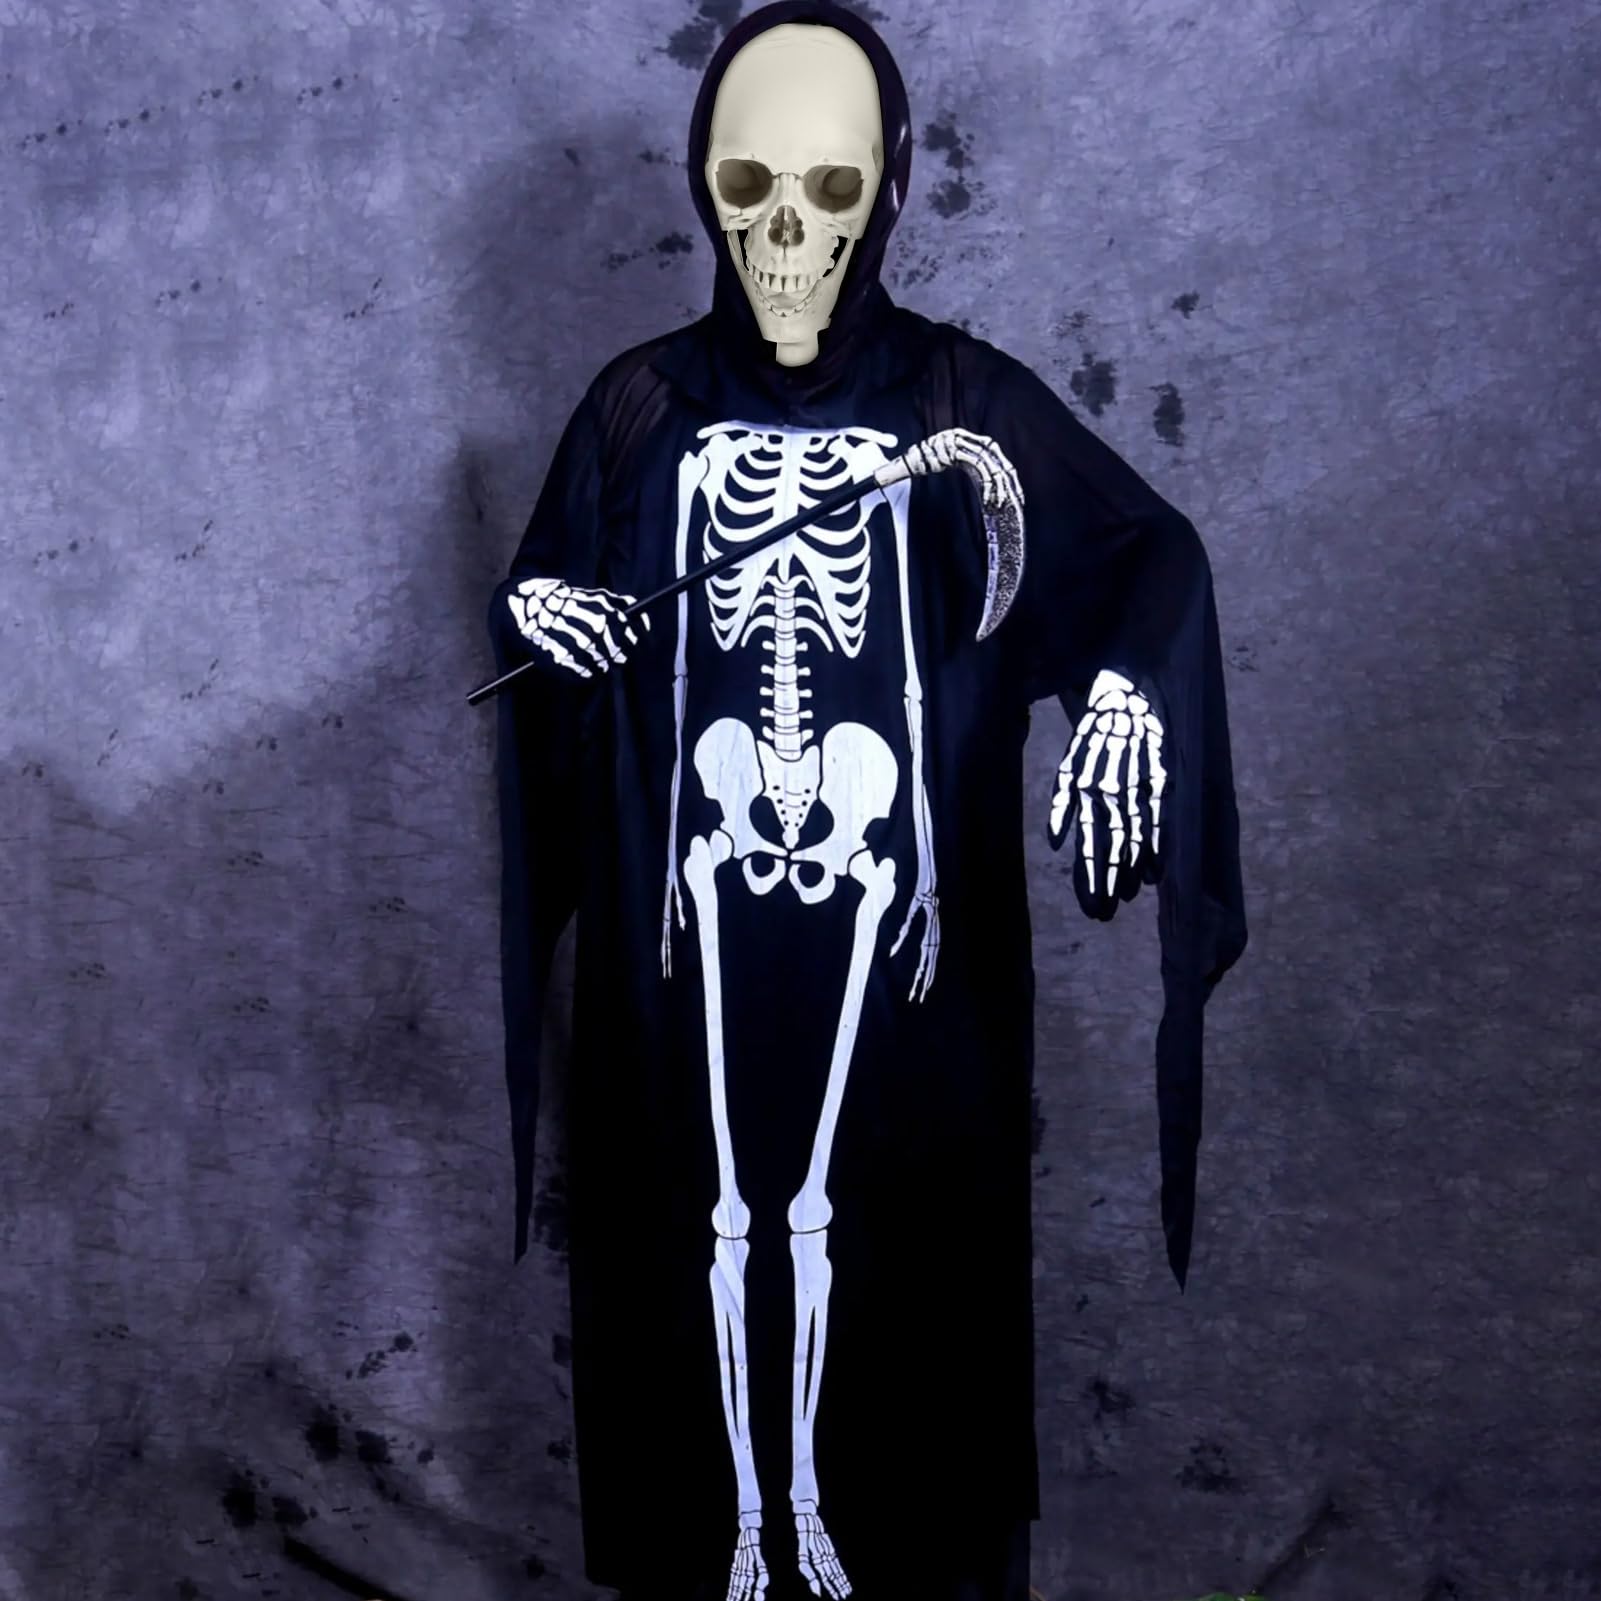 Halloween Life Size Skeleton, 5.4Ft Skeleton Decor Human Full Body Bones Realistic Pose Skeleton Prop with Movable Joints Posable Plastic Skeleton for Indoor Outdoor Party Favors Lawn Décor 170cm